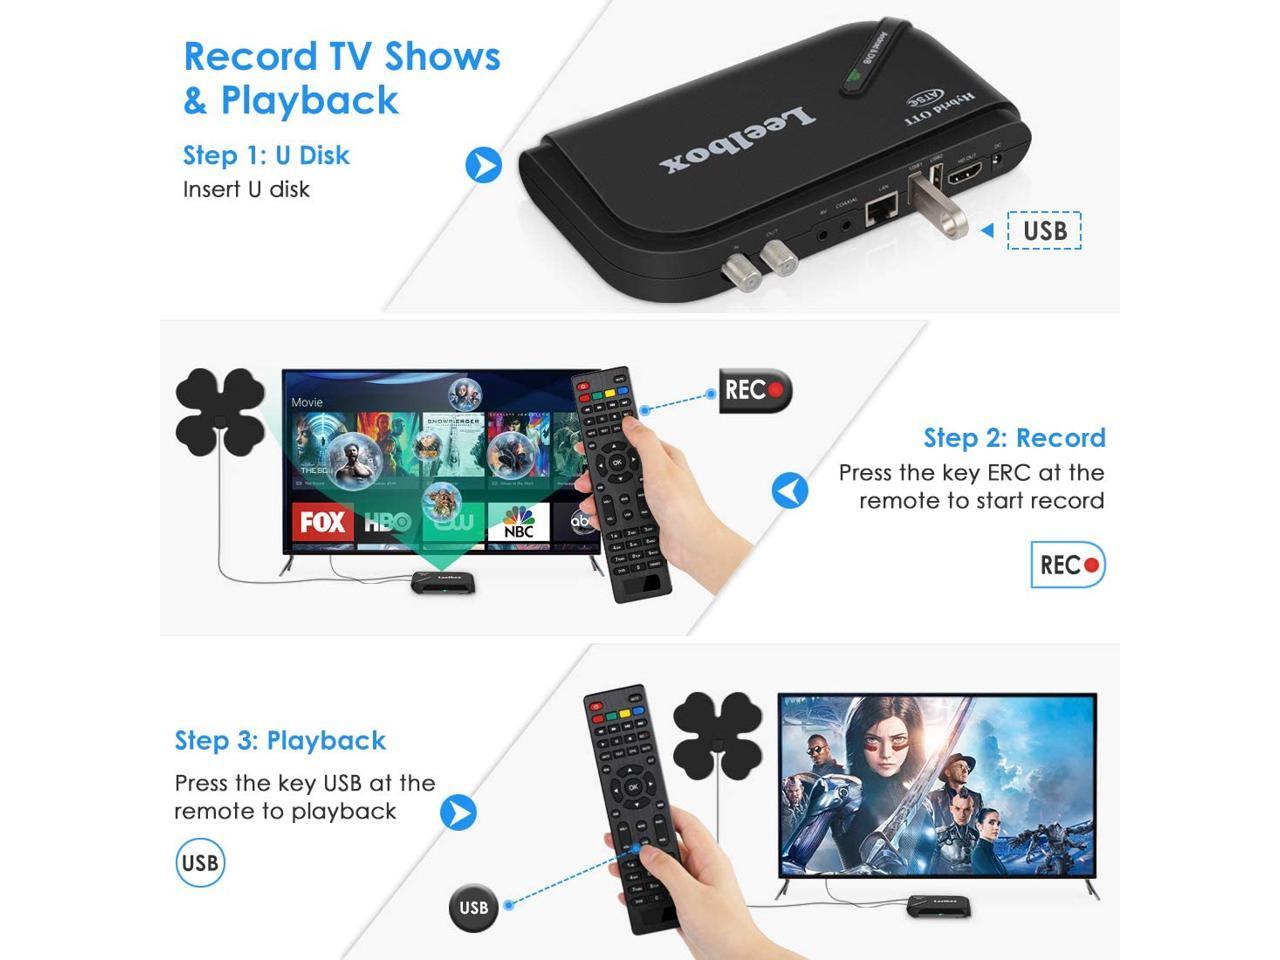 OTT & ATSC Combo Supports Web Browsing/Android APPs/Ultra HD/BT 4.0/2.4G WiFi/Ethernet Leelbox Android TV Box ATSC Digital Converter Box with Recording PVR/Media Player/TV Tuner Function 